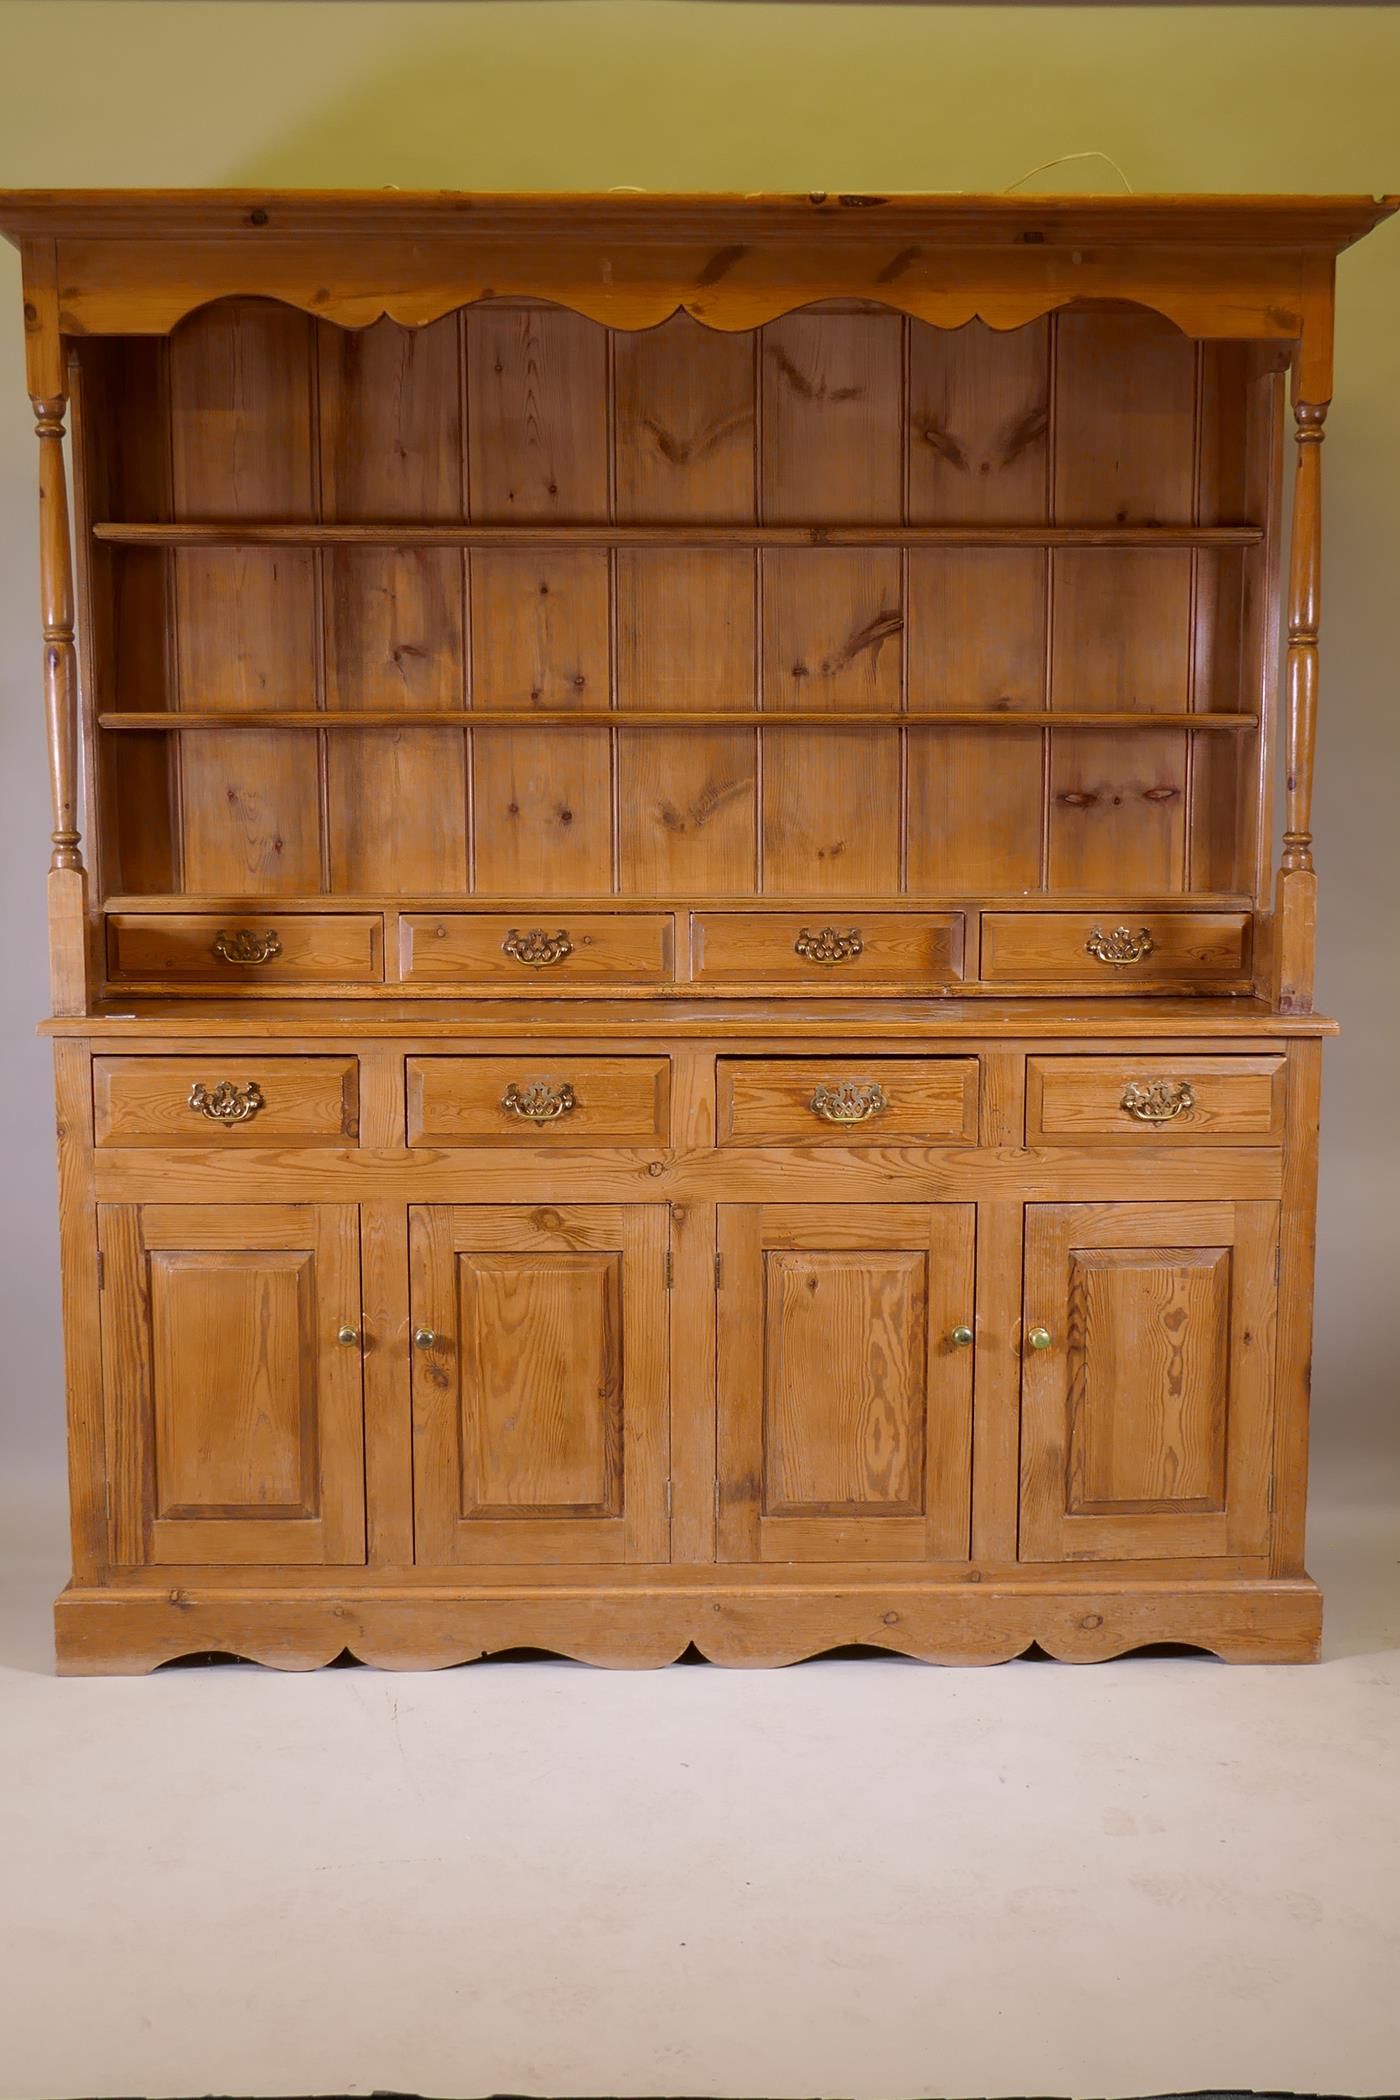 A pine dresser, the upper section with delft rack over four drawers, open sides, the base with